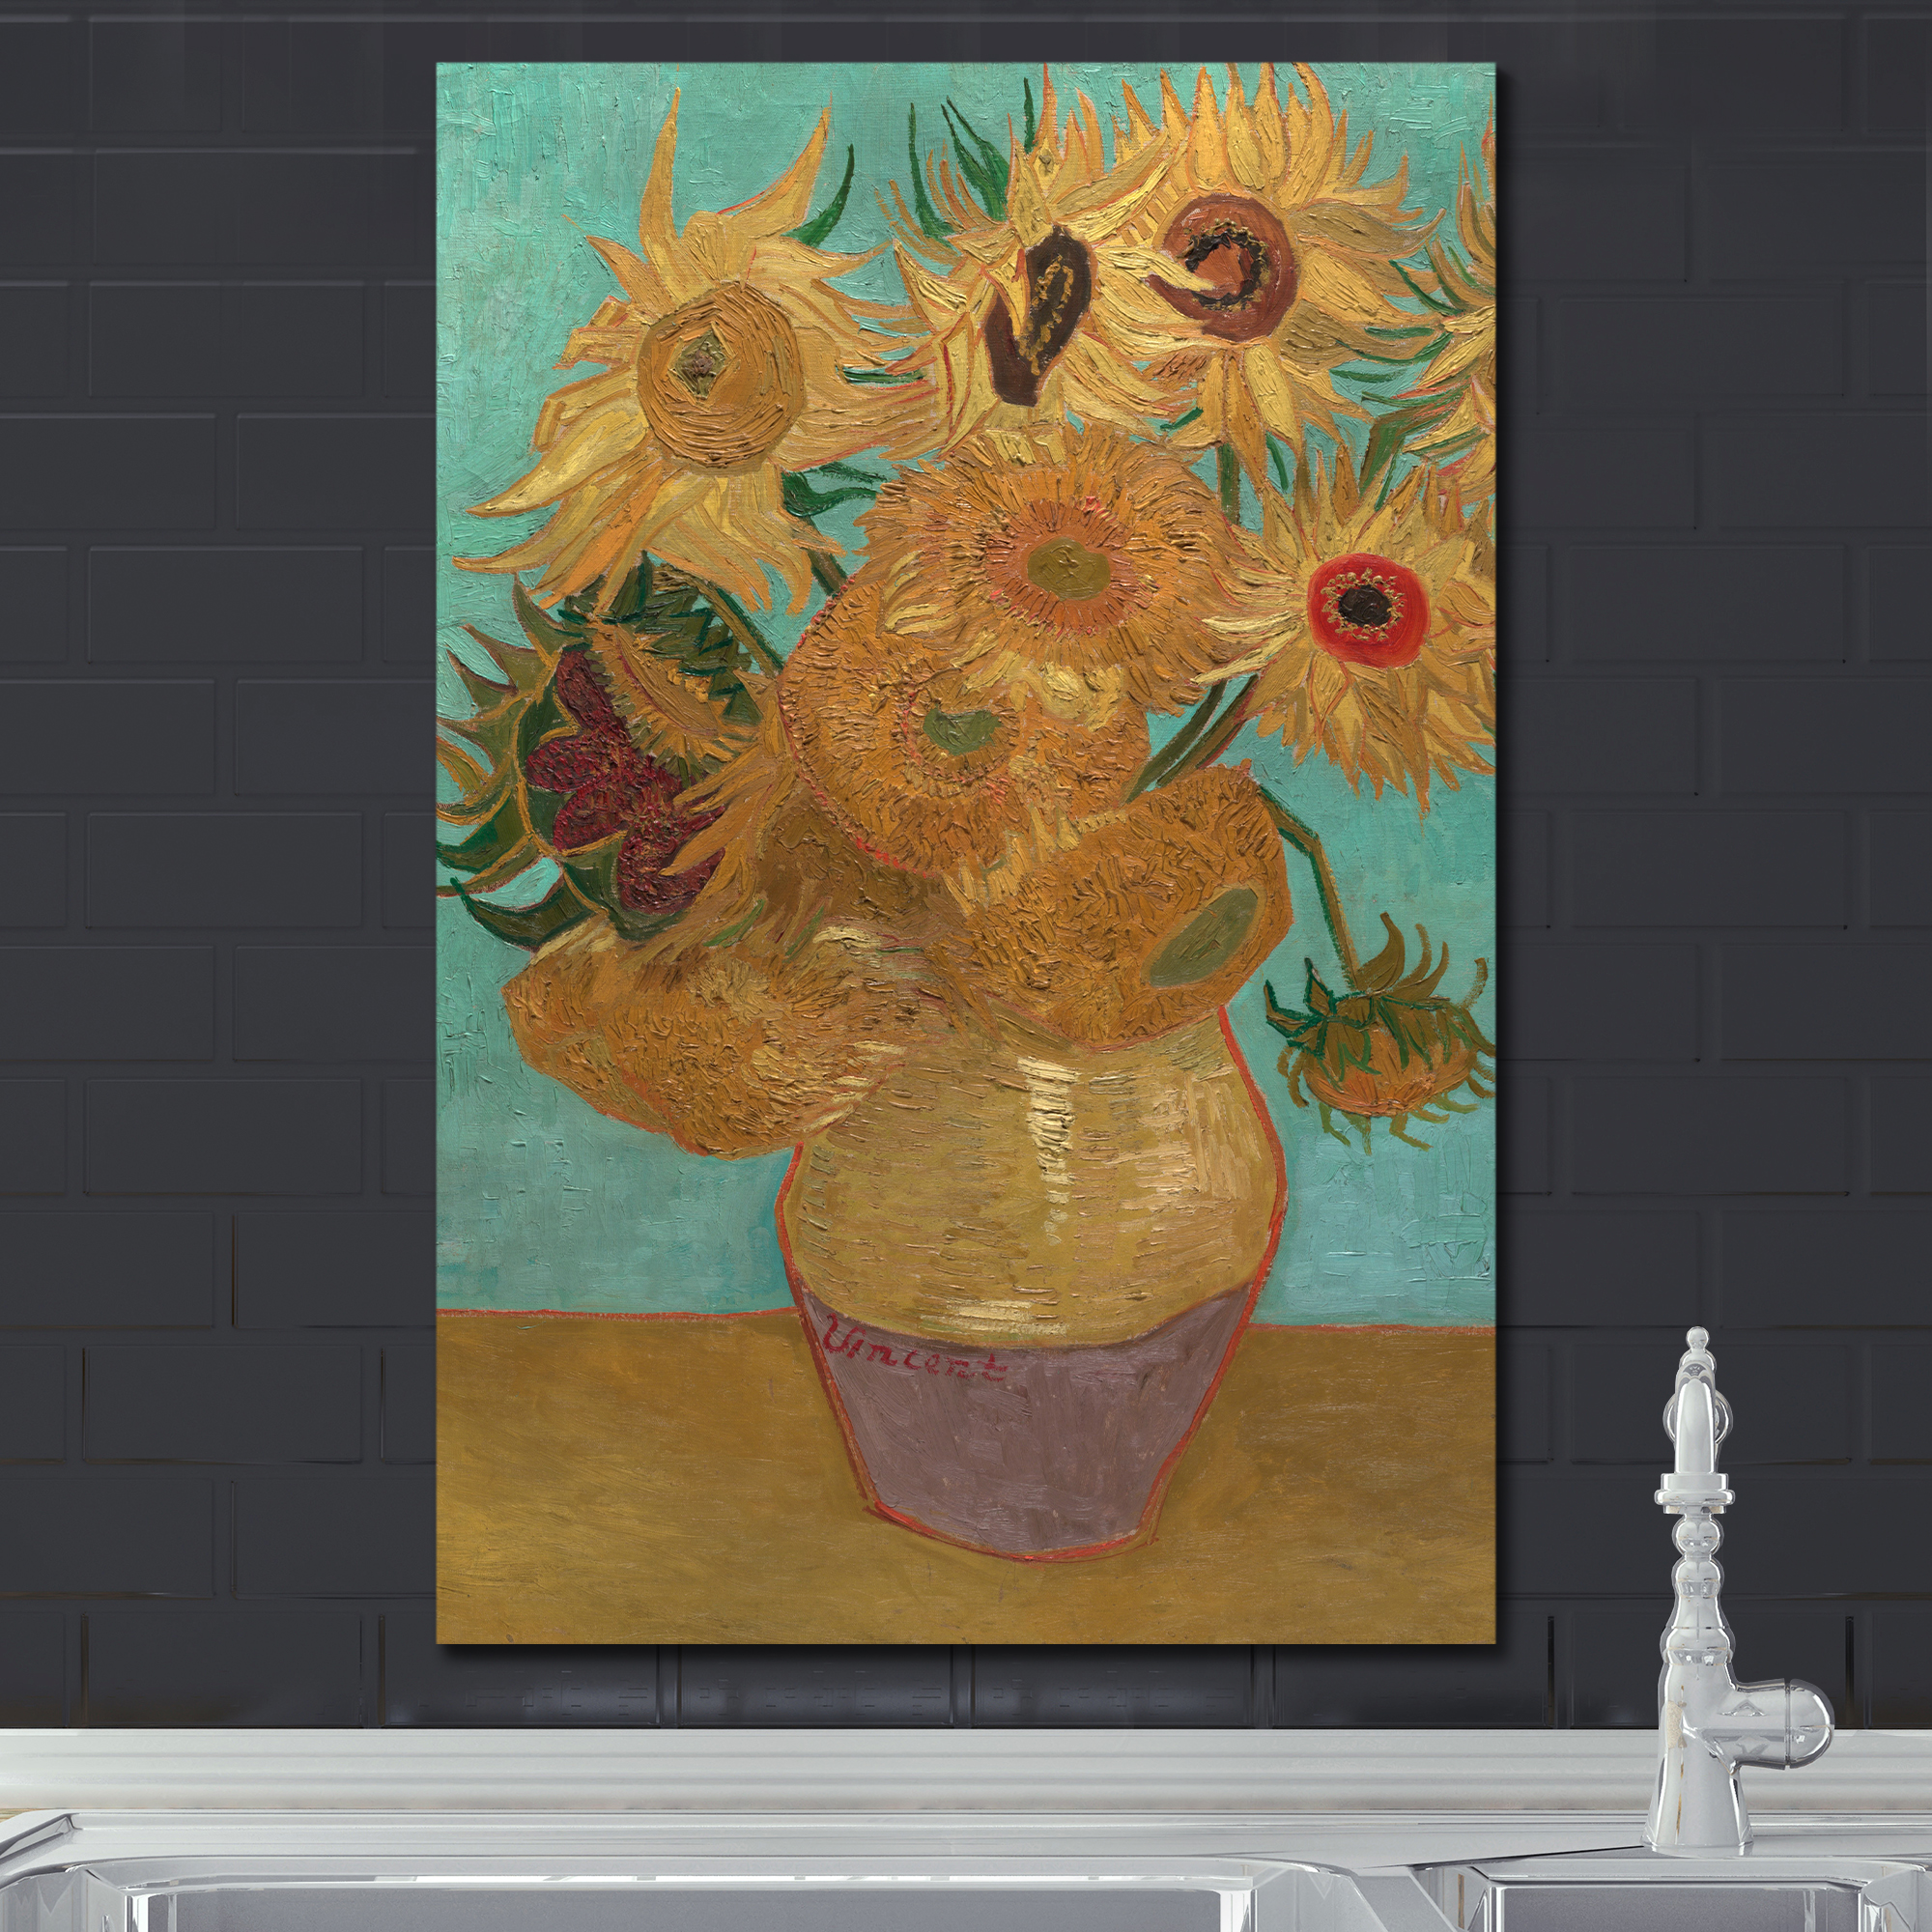 The Sunflowers by Vincent Van Gogh - Oil Painting Reproduction on Canvas Prints Wall Art, Ready to Hang - 24